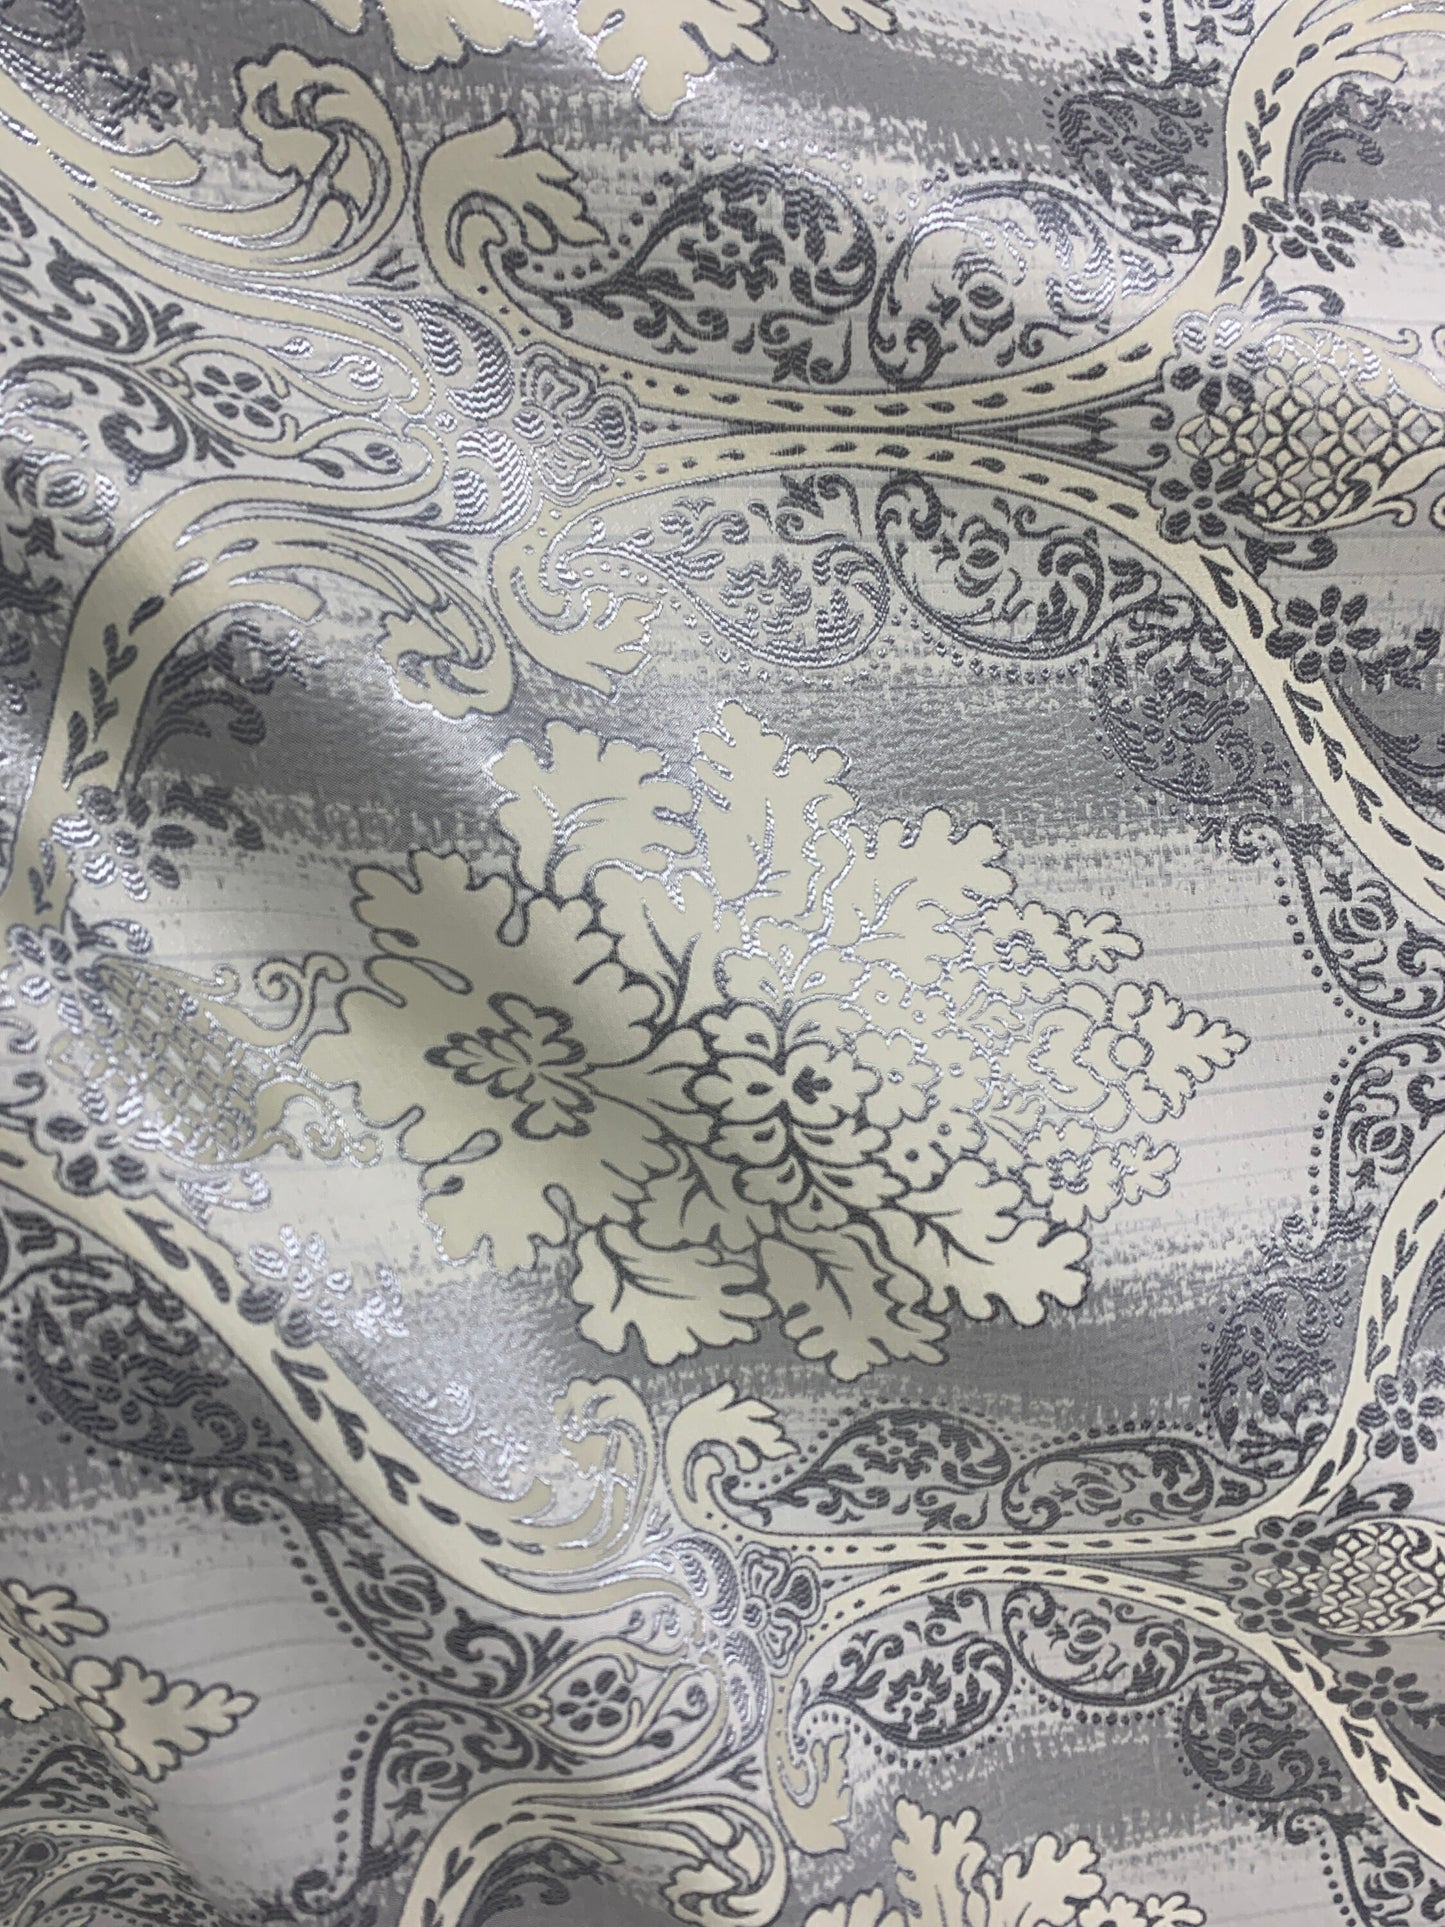 GRAY IVORY Damask Brocade Upholstery Drapery Fabric (110 in.) Sold By The Yard